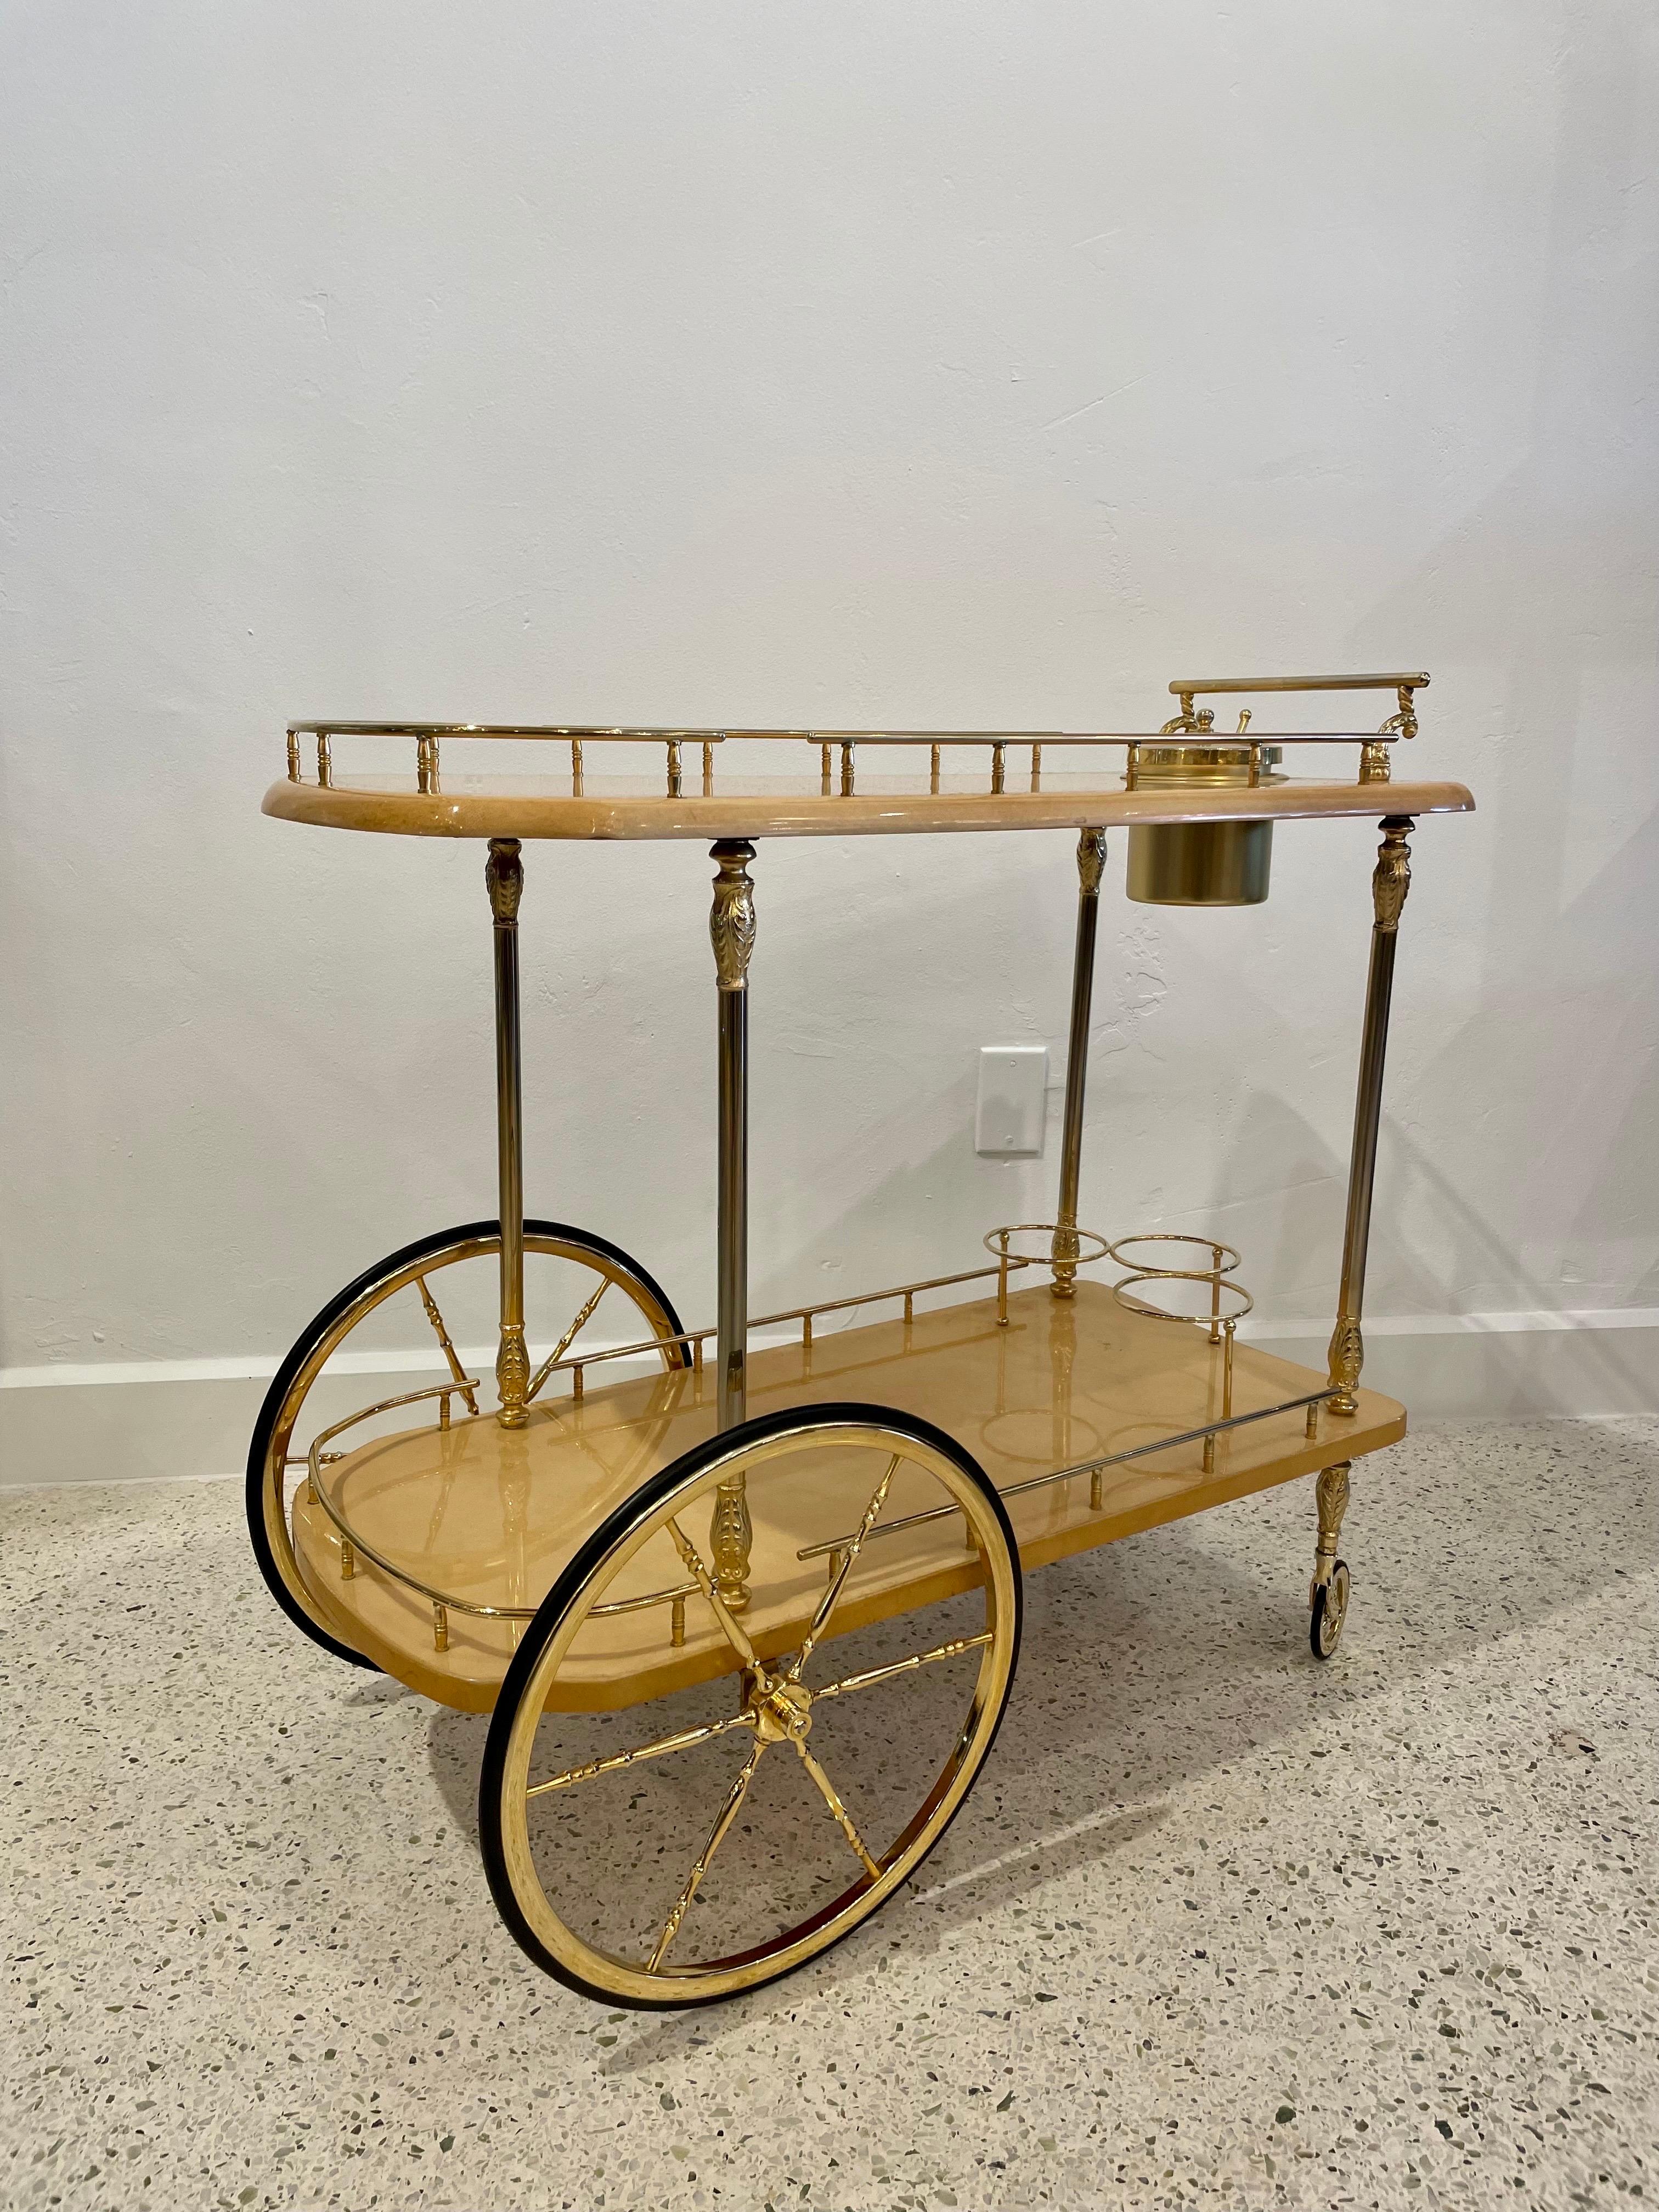 An original vintage Aldo Tura bar cart in classic parchment tone lacquered goatskin and gold plated metal. Very classic Italian mid-century modern look. Signed underneath.